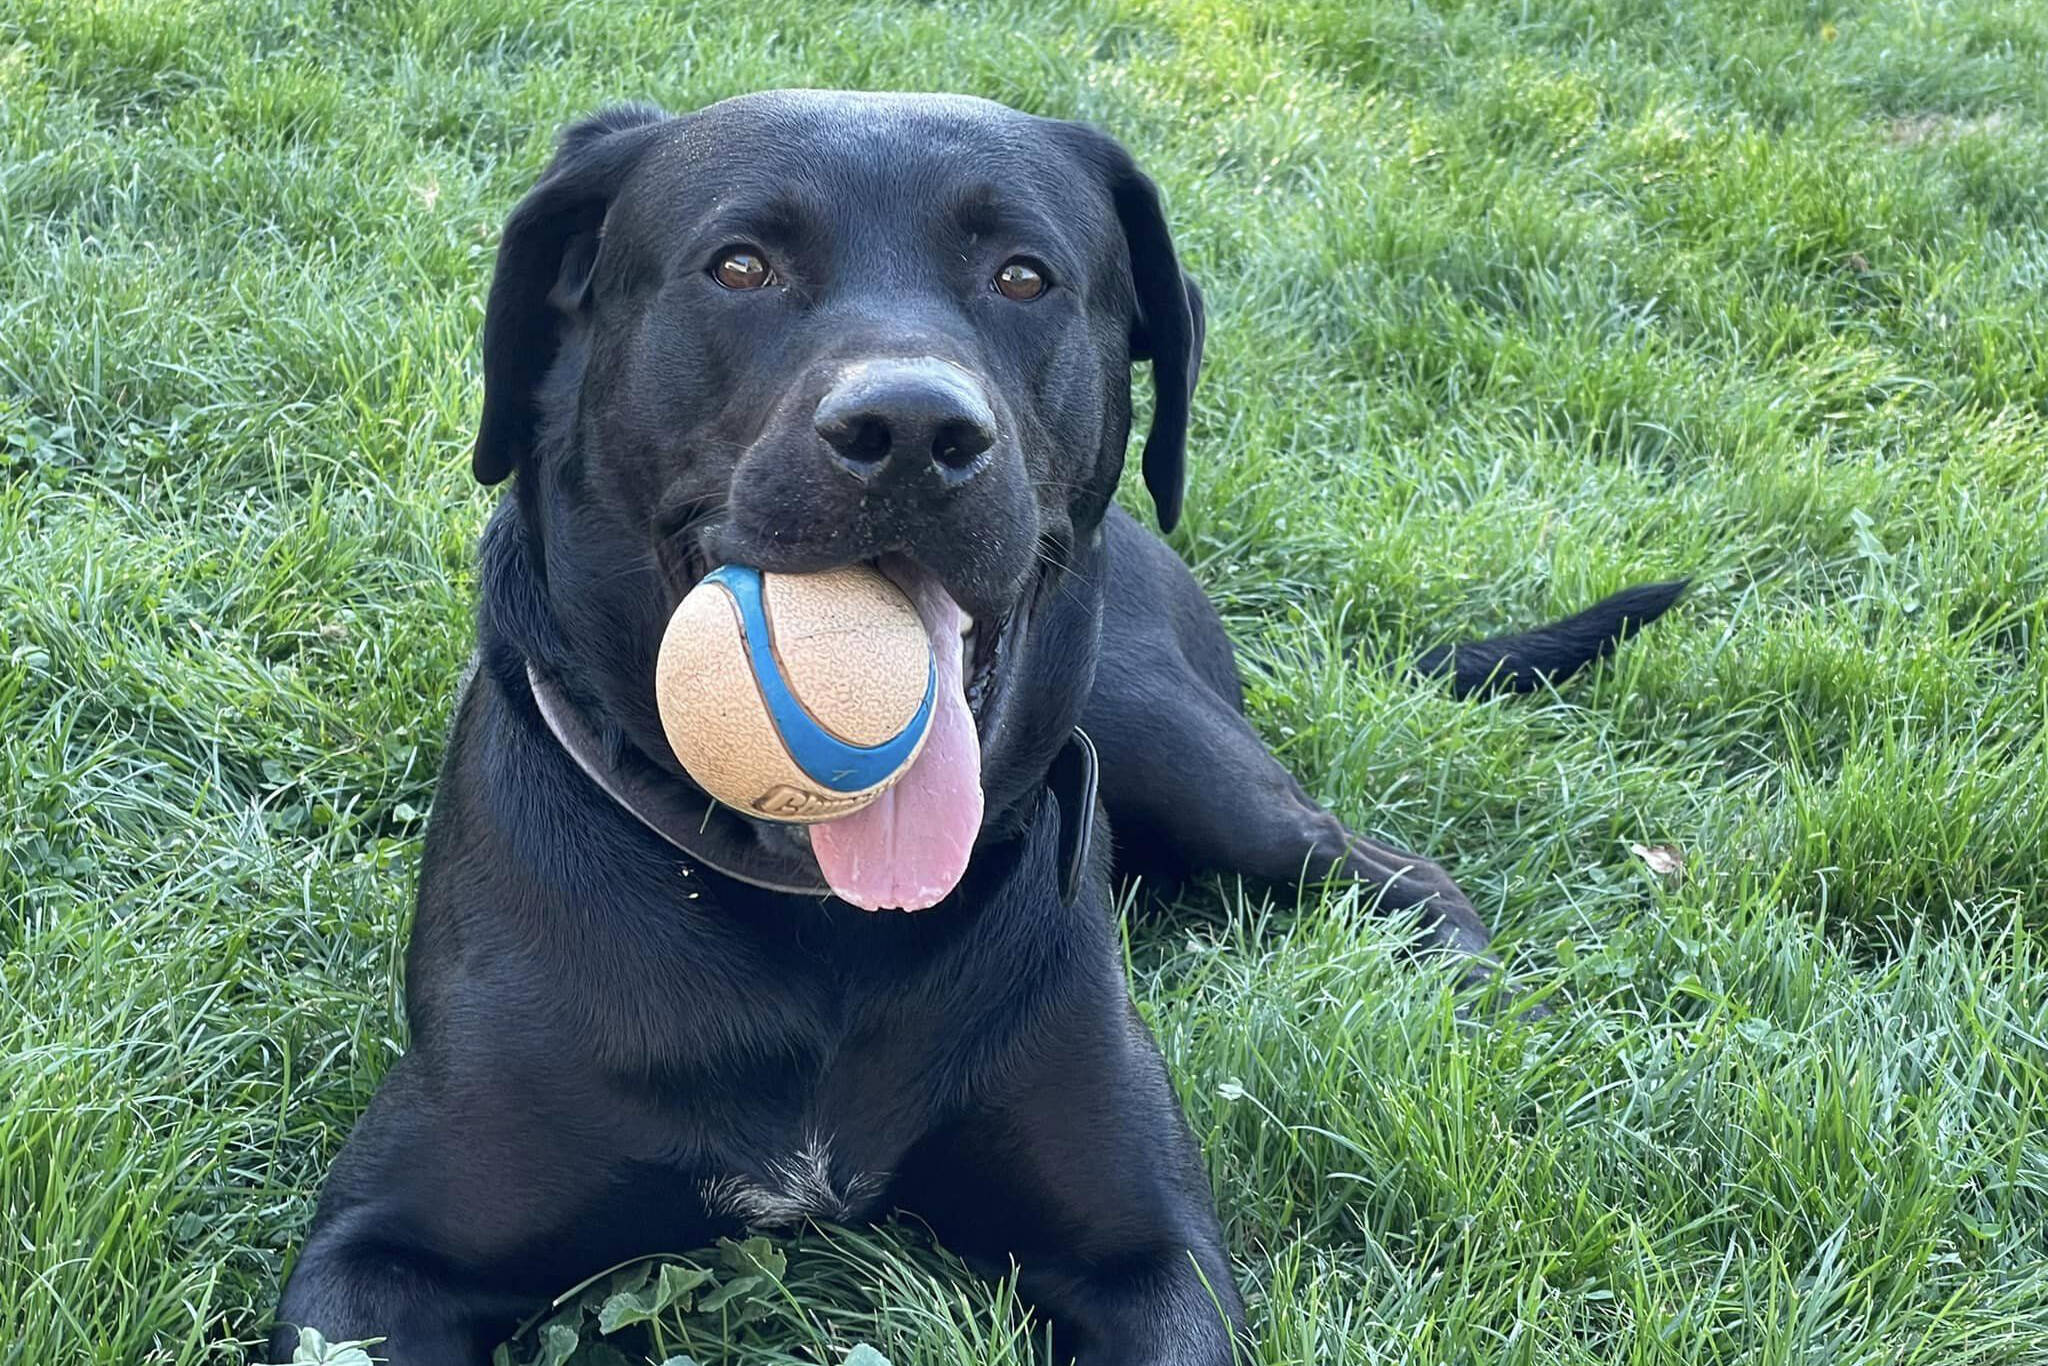 Vador, a 3-year-old lab mix, came into care of Penticton Dog Control as a stray but now is up for adoption as it turned out his owner was one of two found dead in an Oliver travel trailer on Oct. 1. (Penticton Dog Control Facebook)